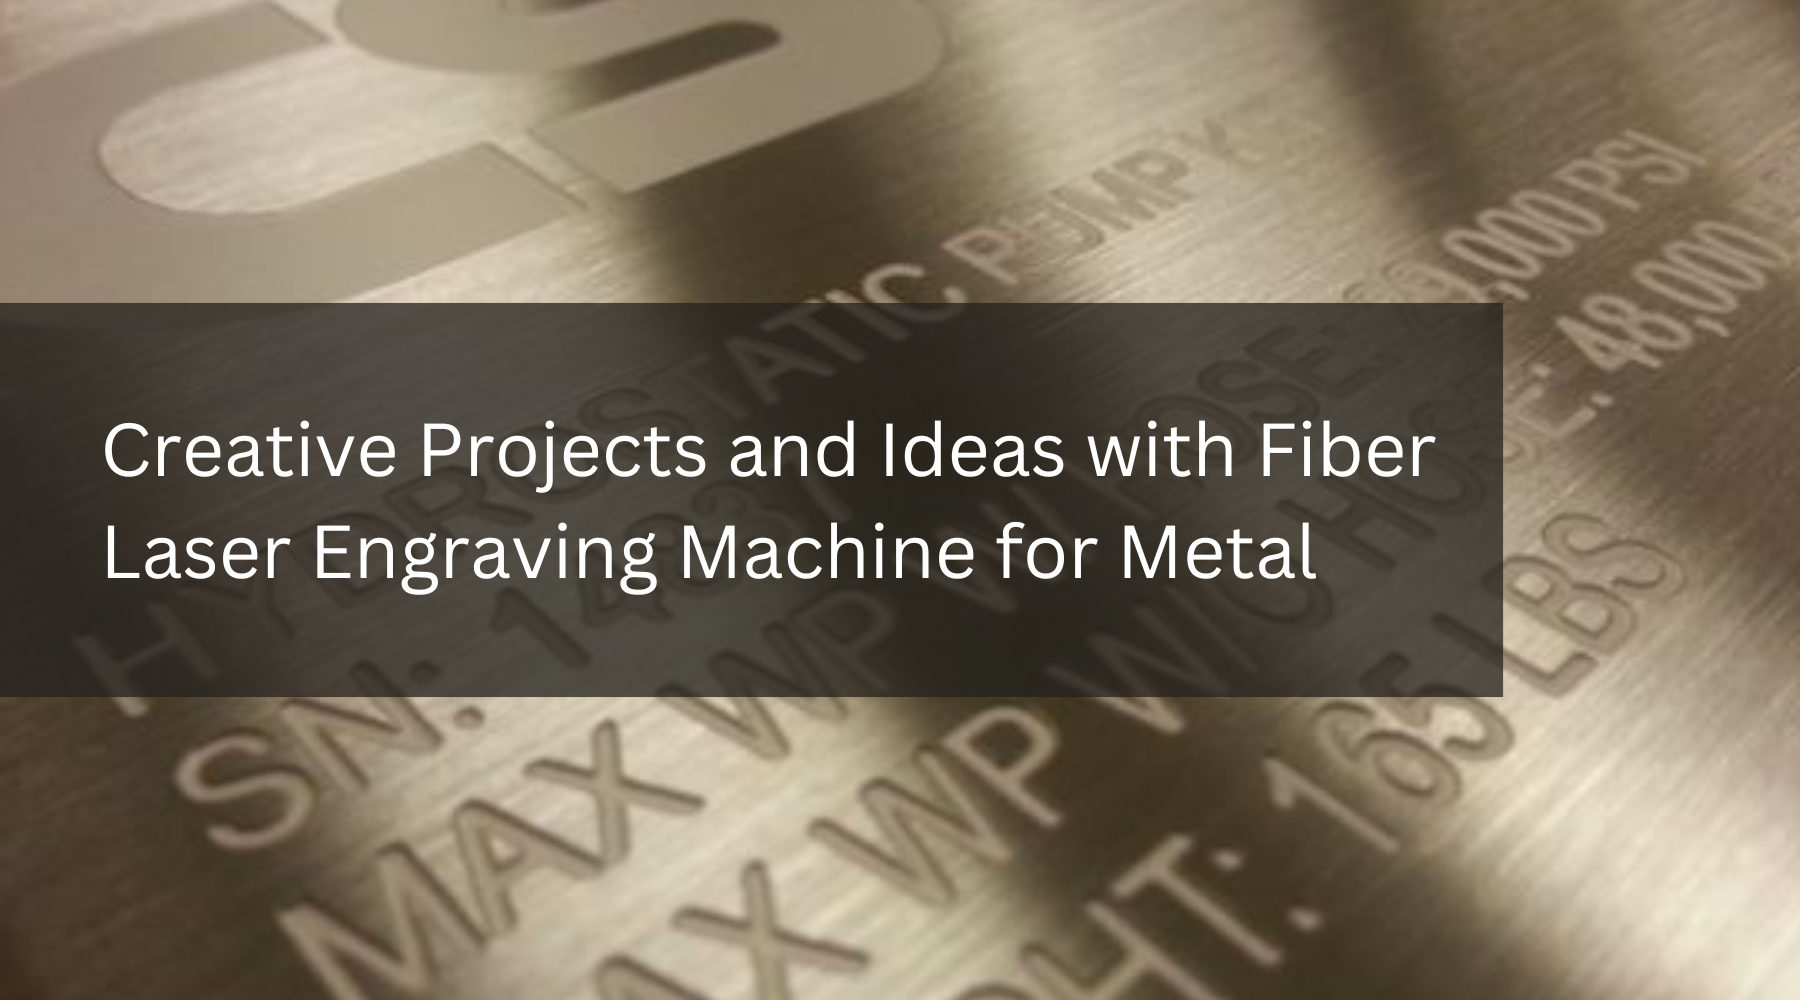 Creative Projects and Ideas with Fiber Laser Engraving Machine for Metal